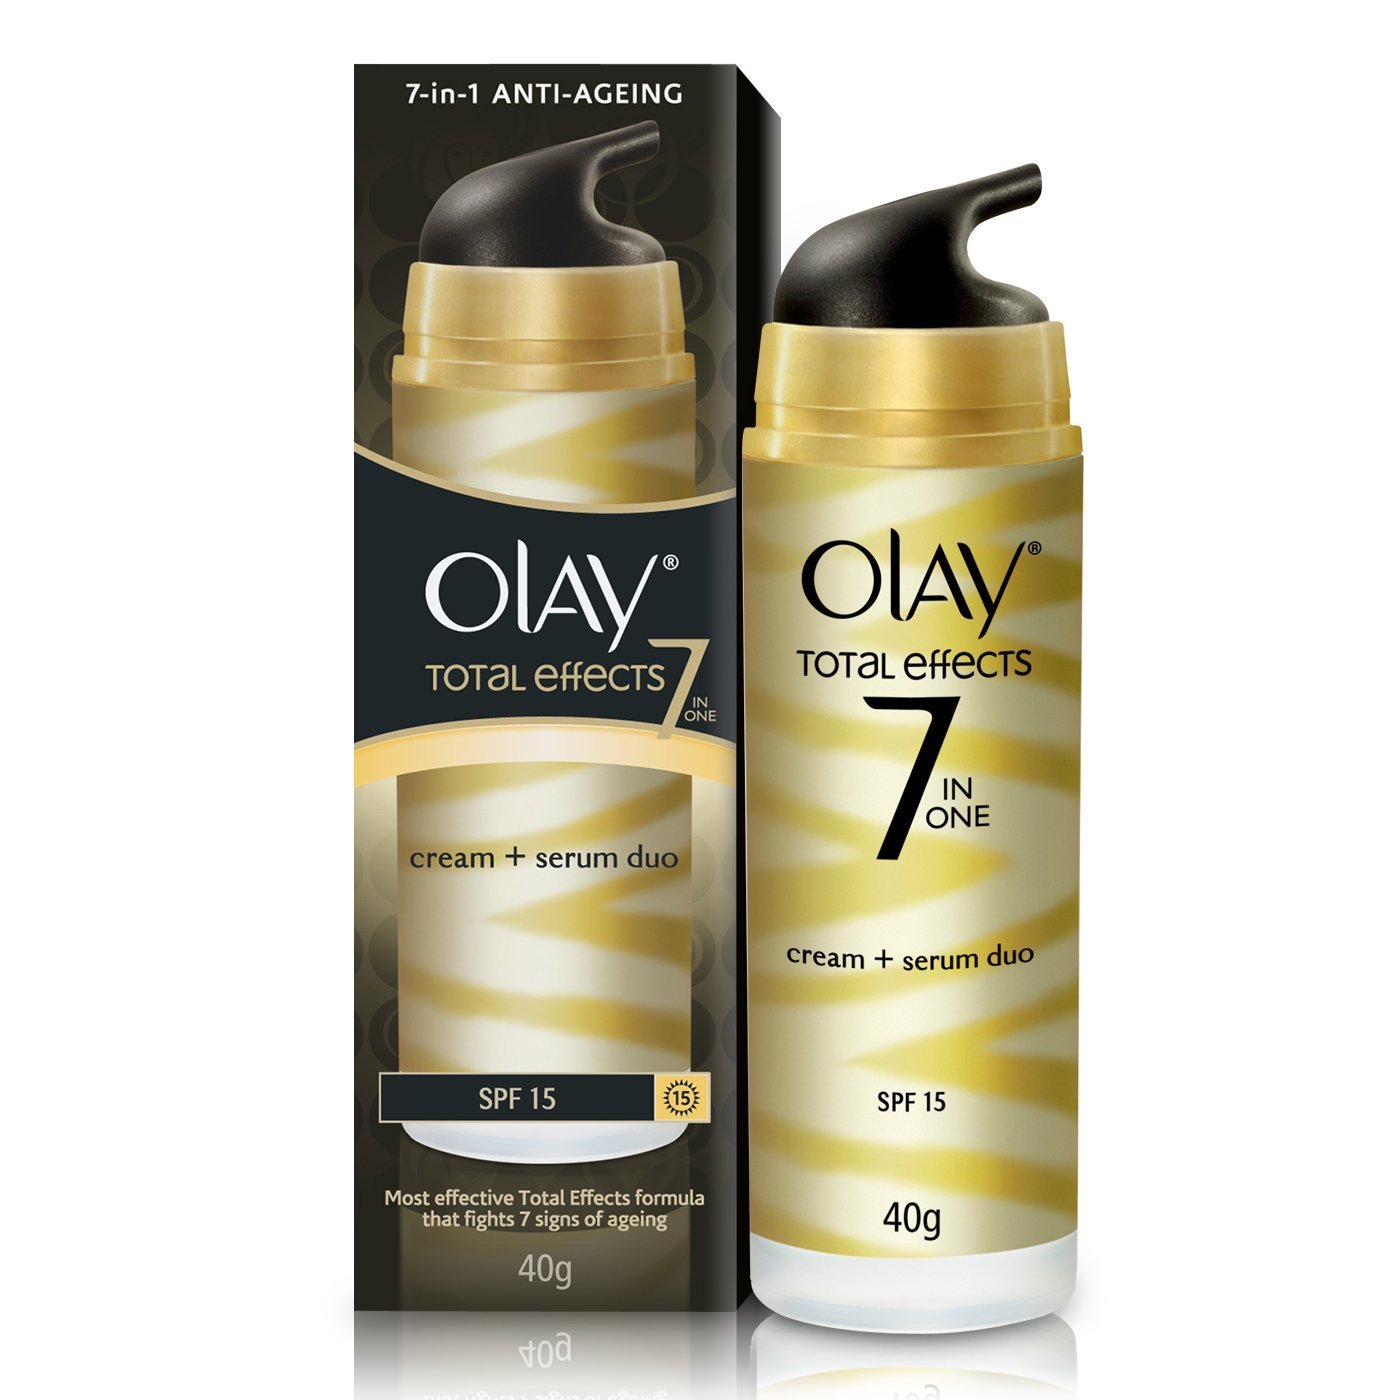 Olay Total Effects 7 In 1 Anti Ageing Cream Serum Duo Spf 15 40g